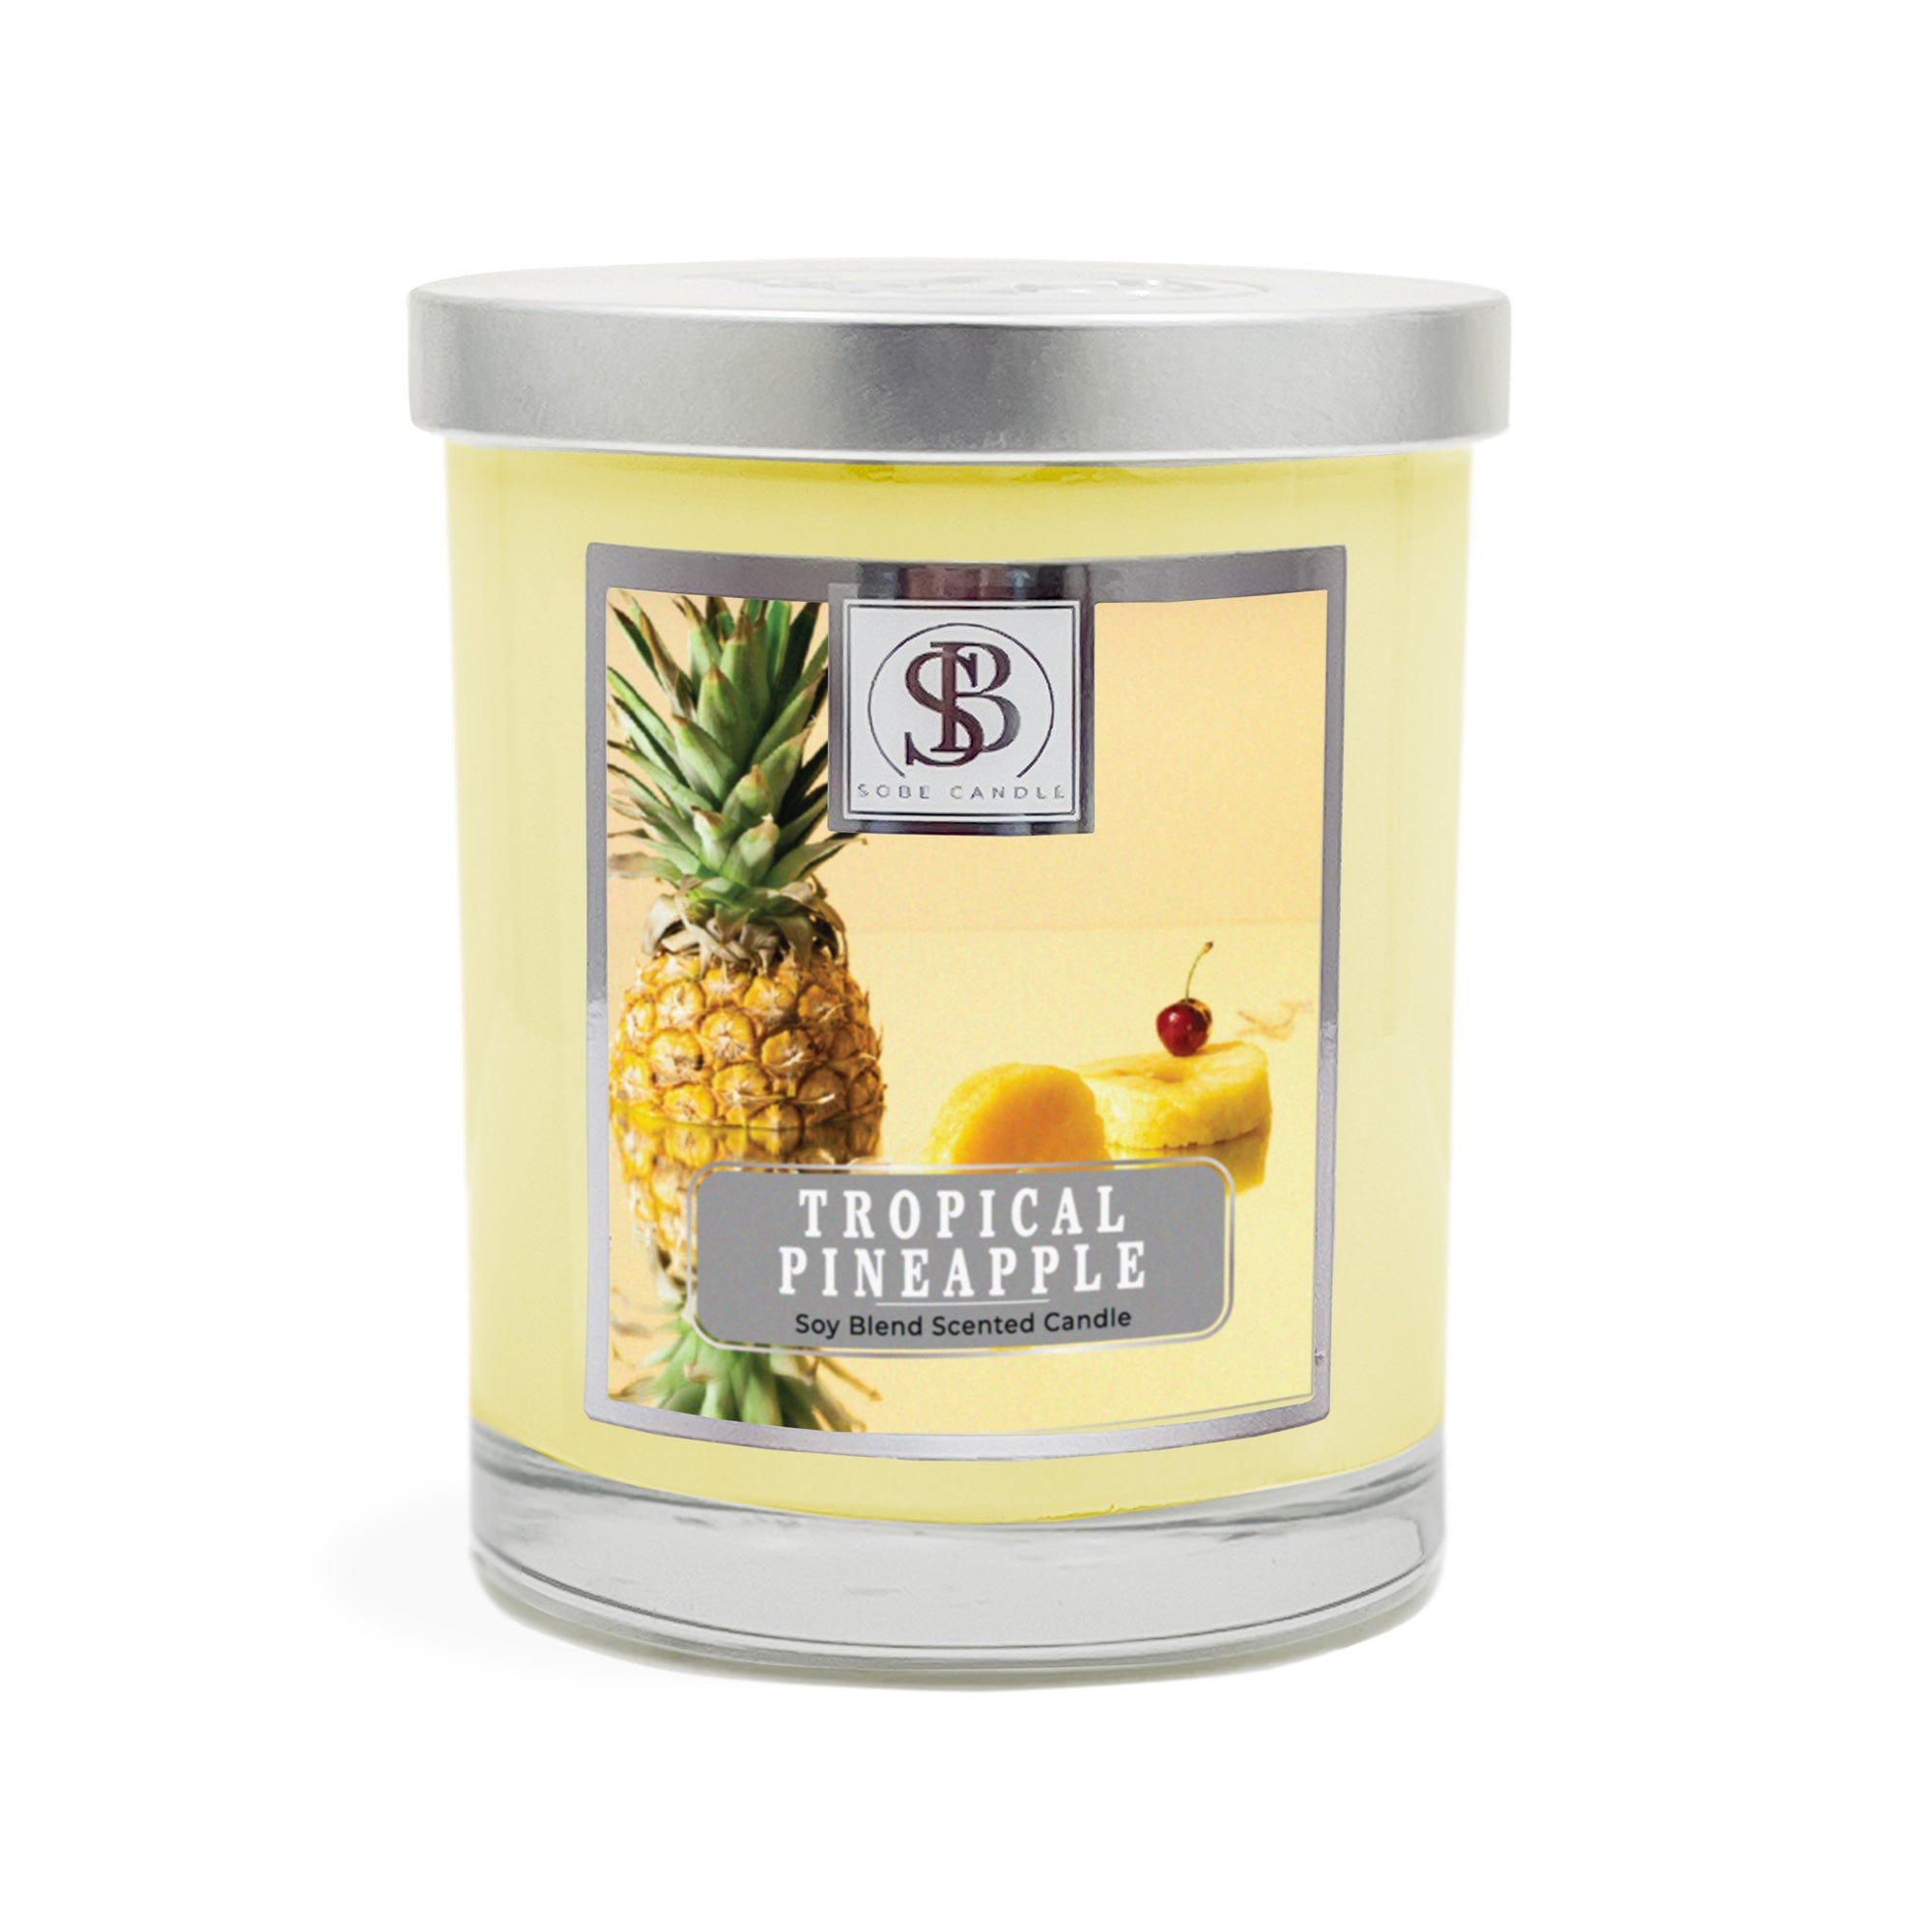 TROPICAL PINEAPPLE | Soy Scented Candle 11 oz